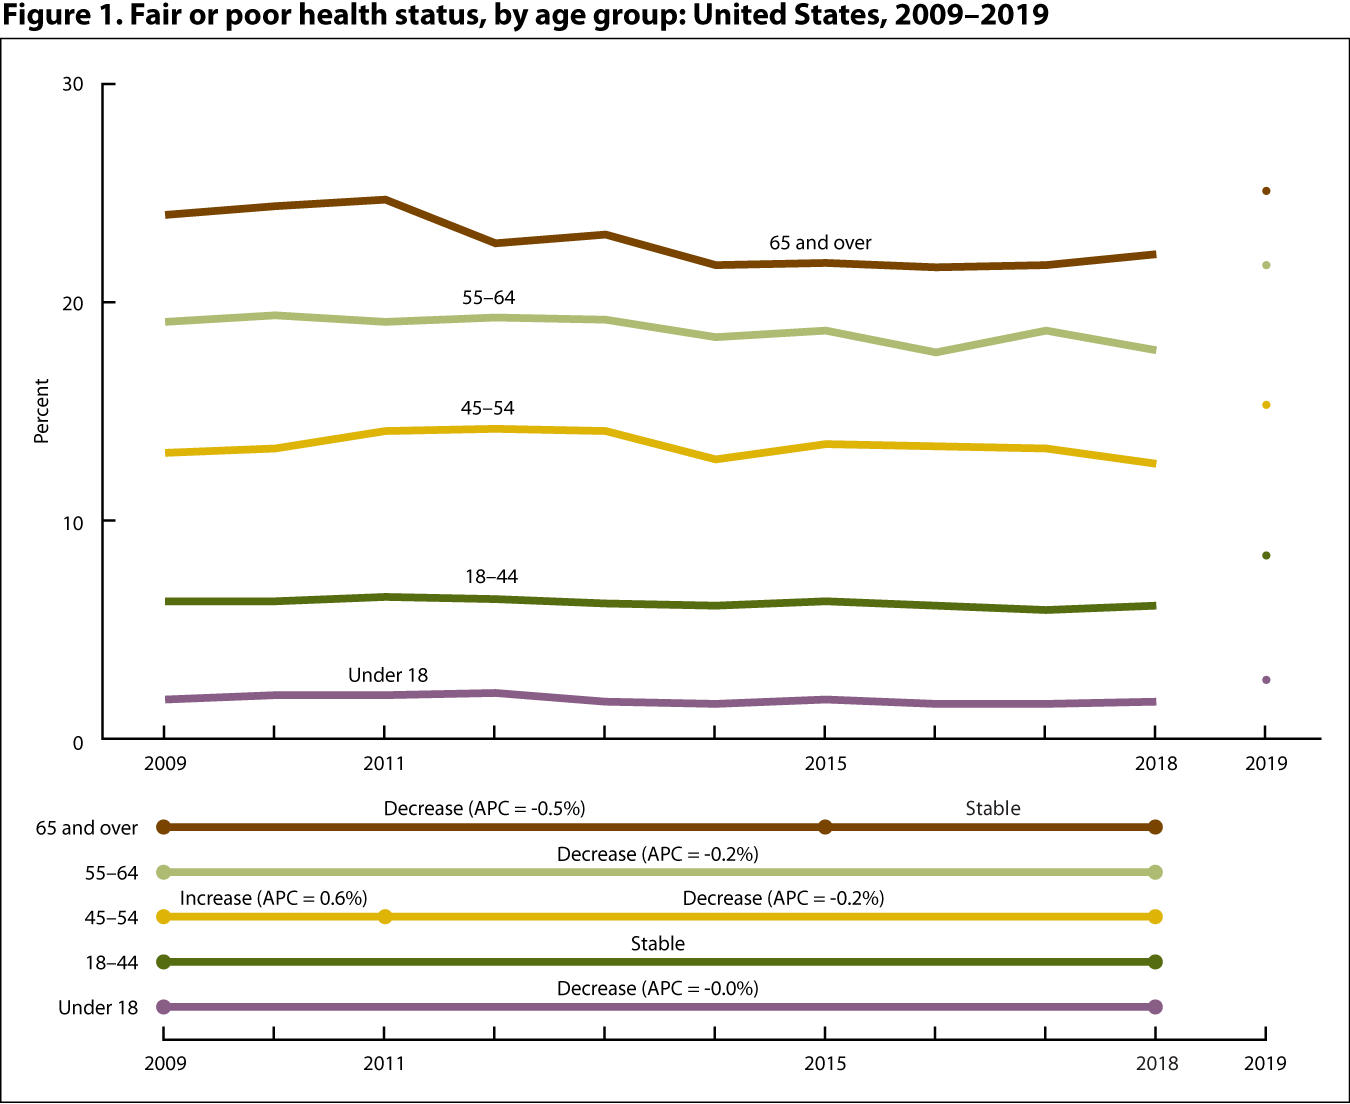 Figure 1 is a line graph showing the percentage of people who reported fair or poor health status, by age group for 2009 through 2018 and at 2019 (point).